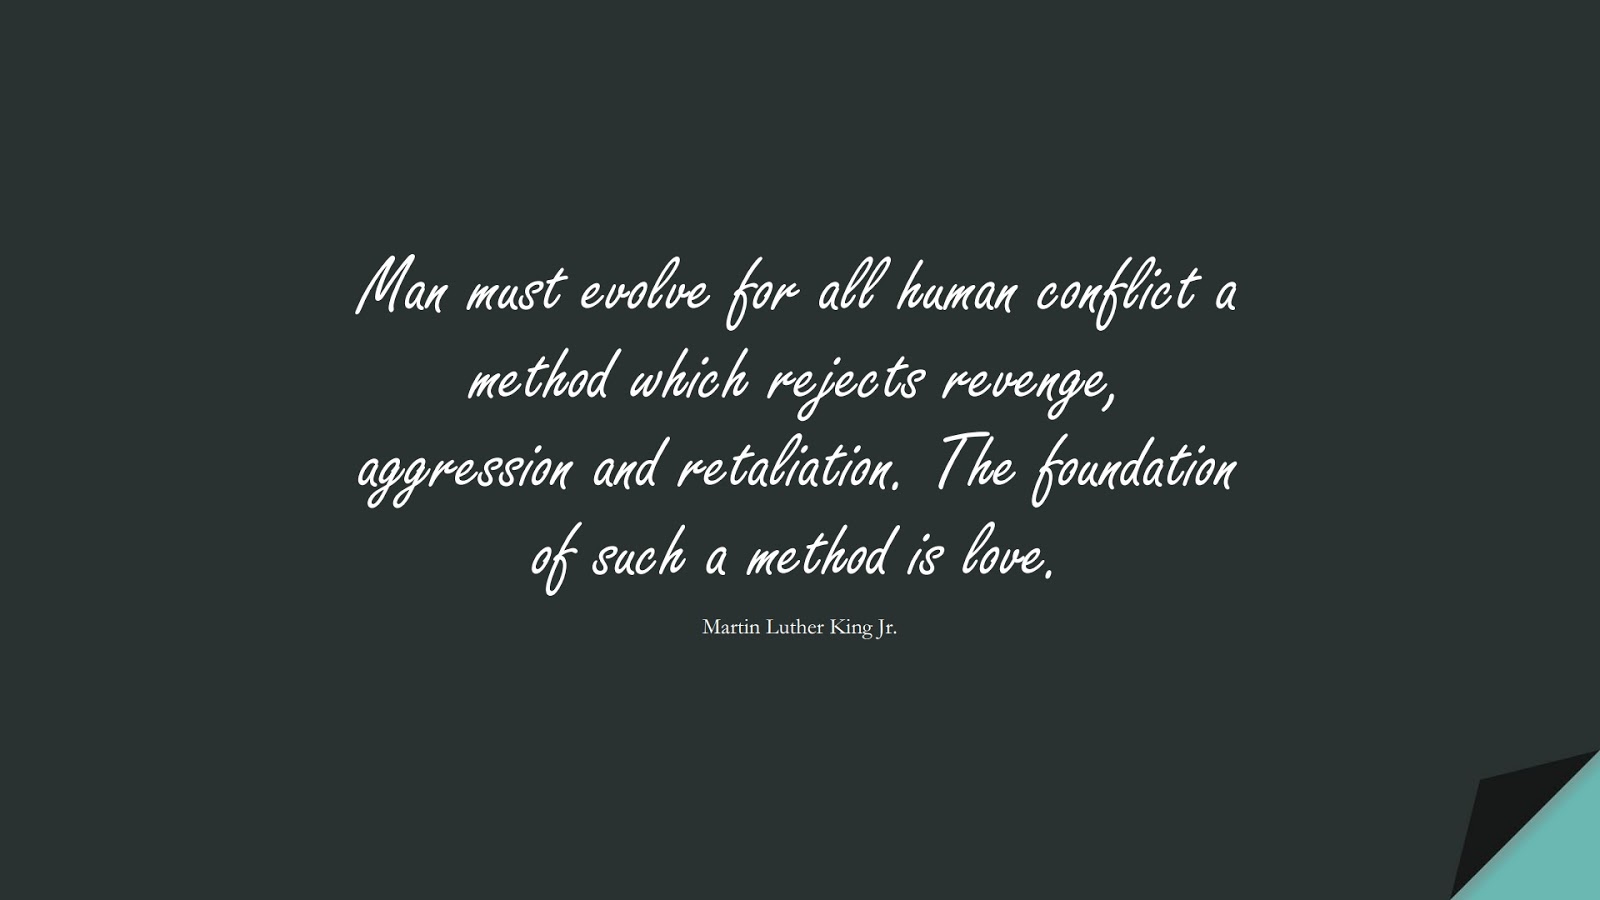 Man must evolve for all human conflict a method which rejects revenge, aggression and retaliation. The foundation of such a method is love. (Martin Luther King Jr.);  #MartinLutherKingJrQuotes